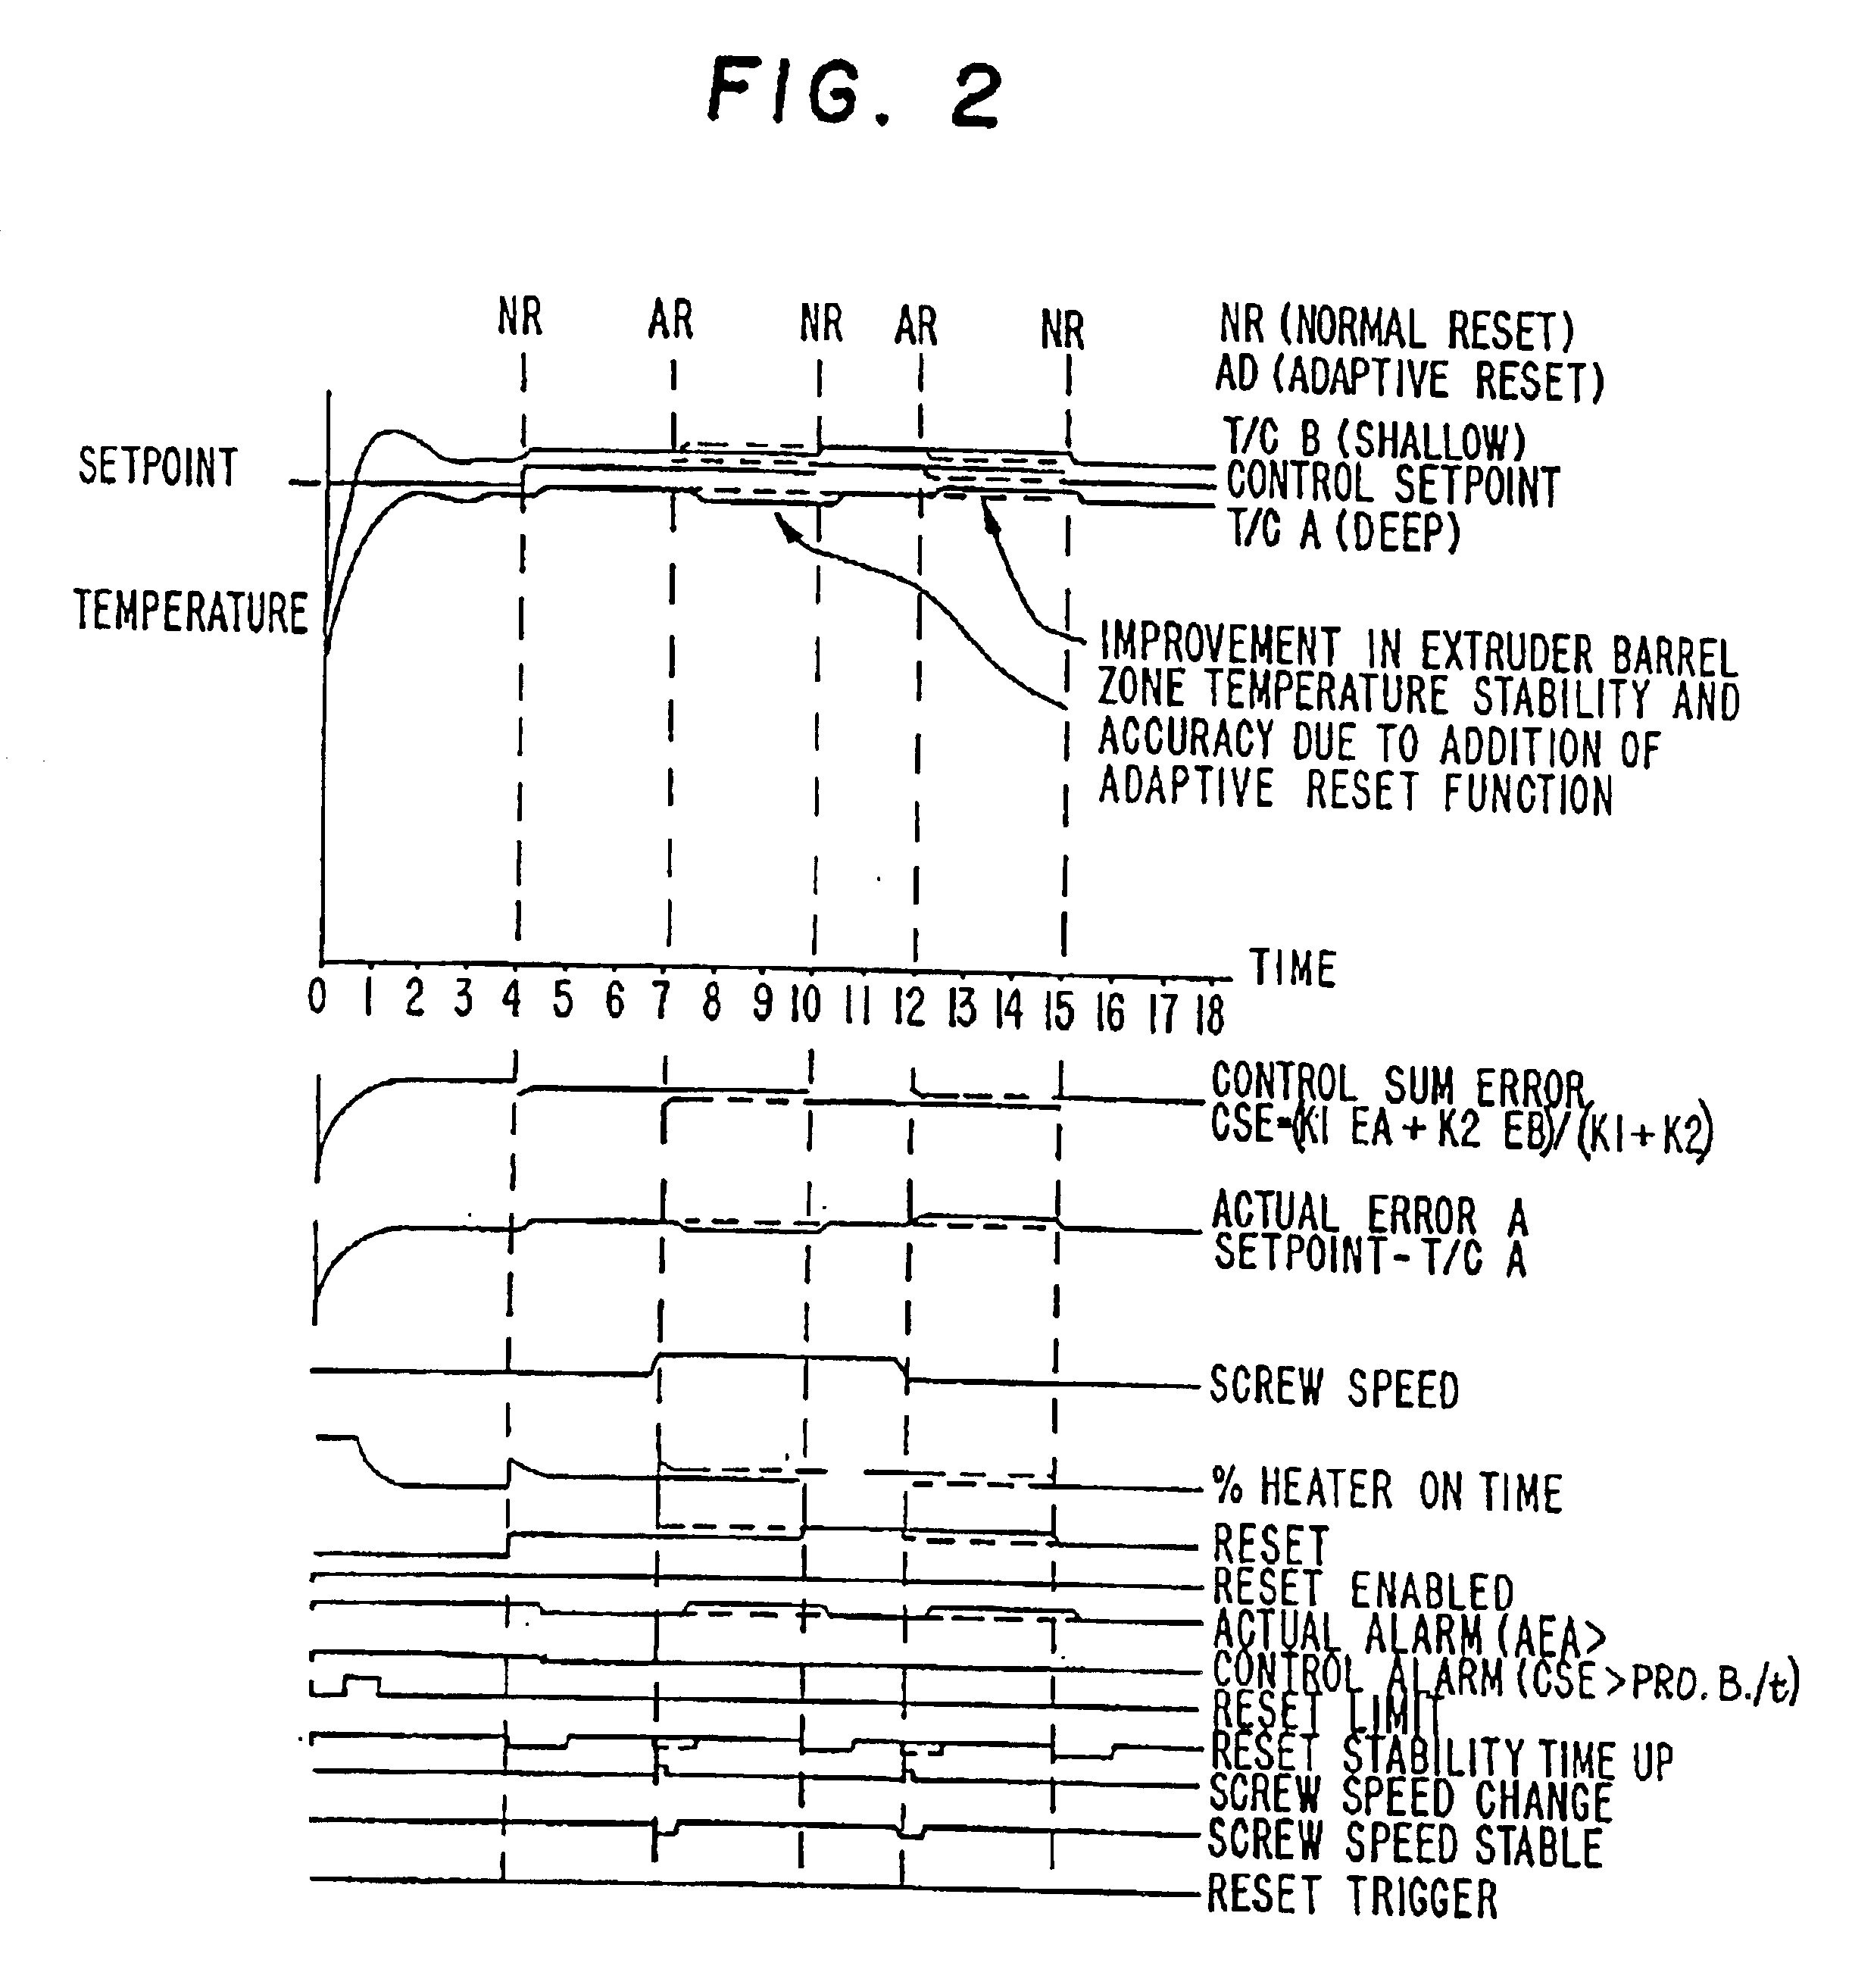 Method for operating extruder temperature controller with stable temperature reset